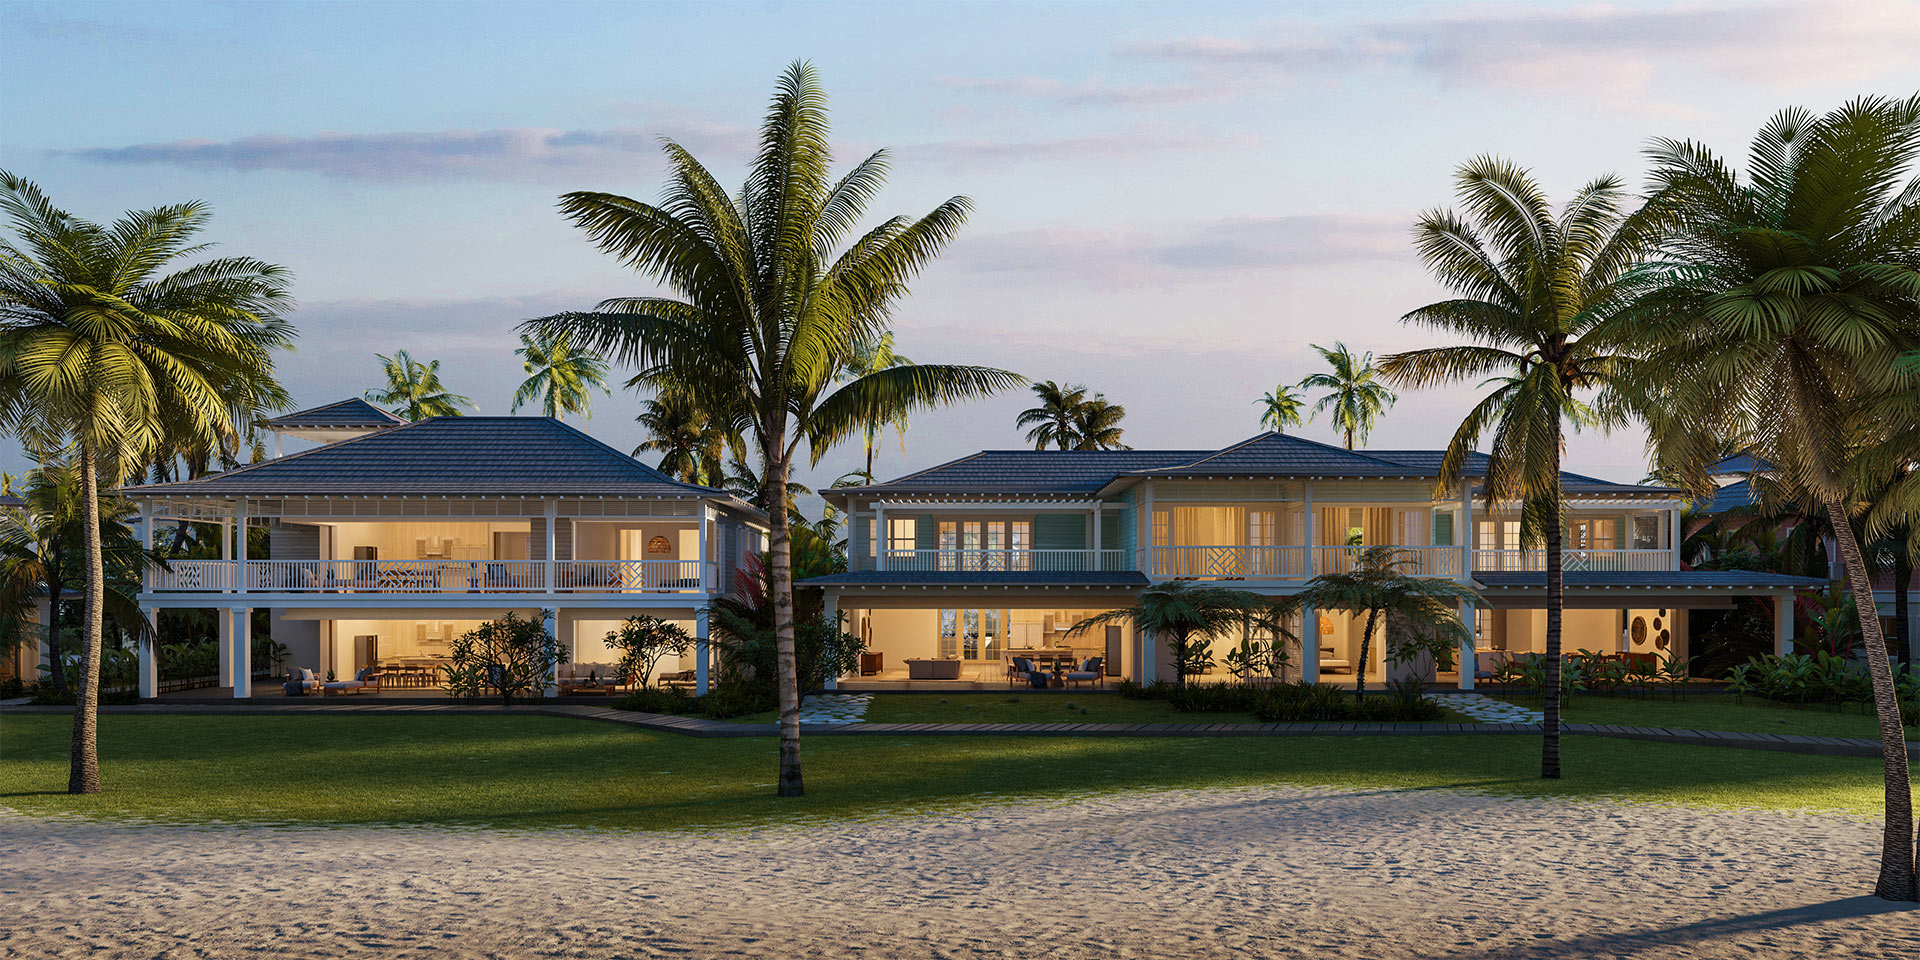 Luxurious beachfront property at The Abaco Club offering premier coastal living